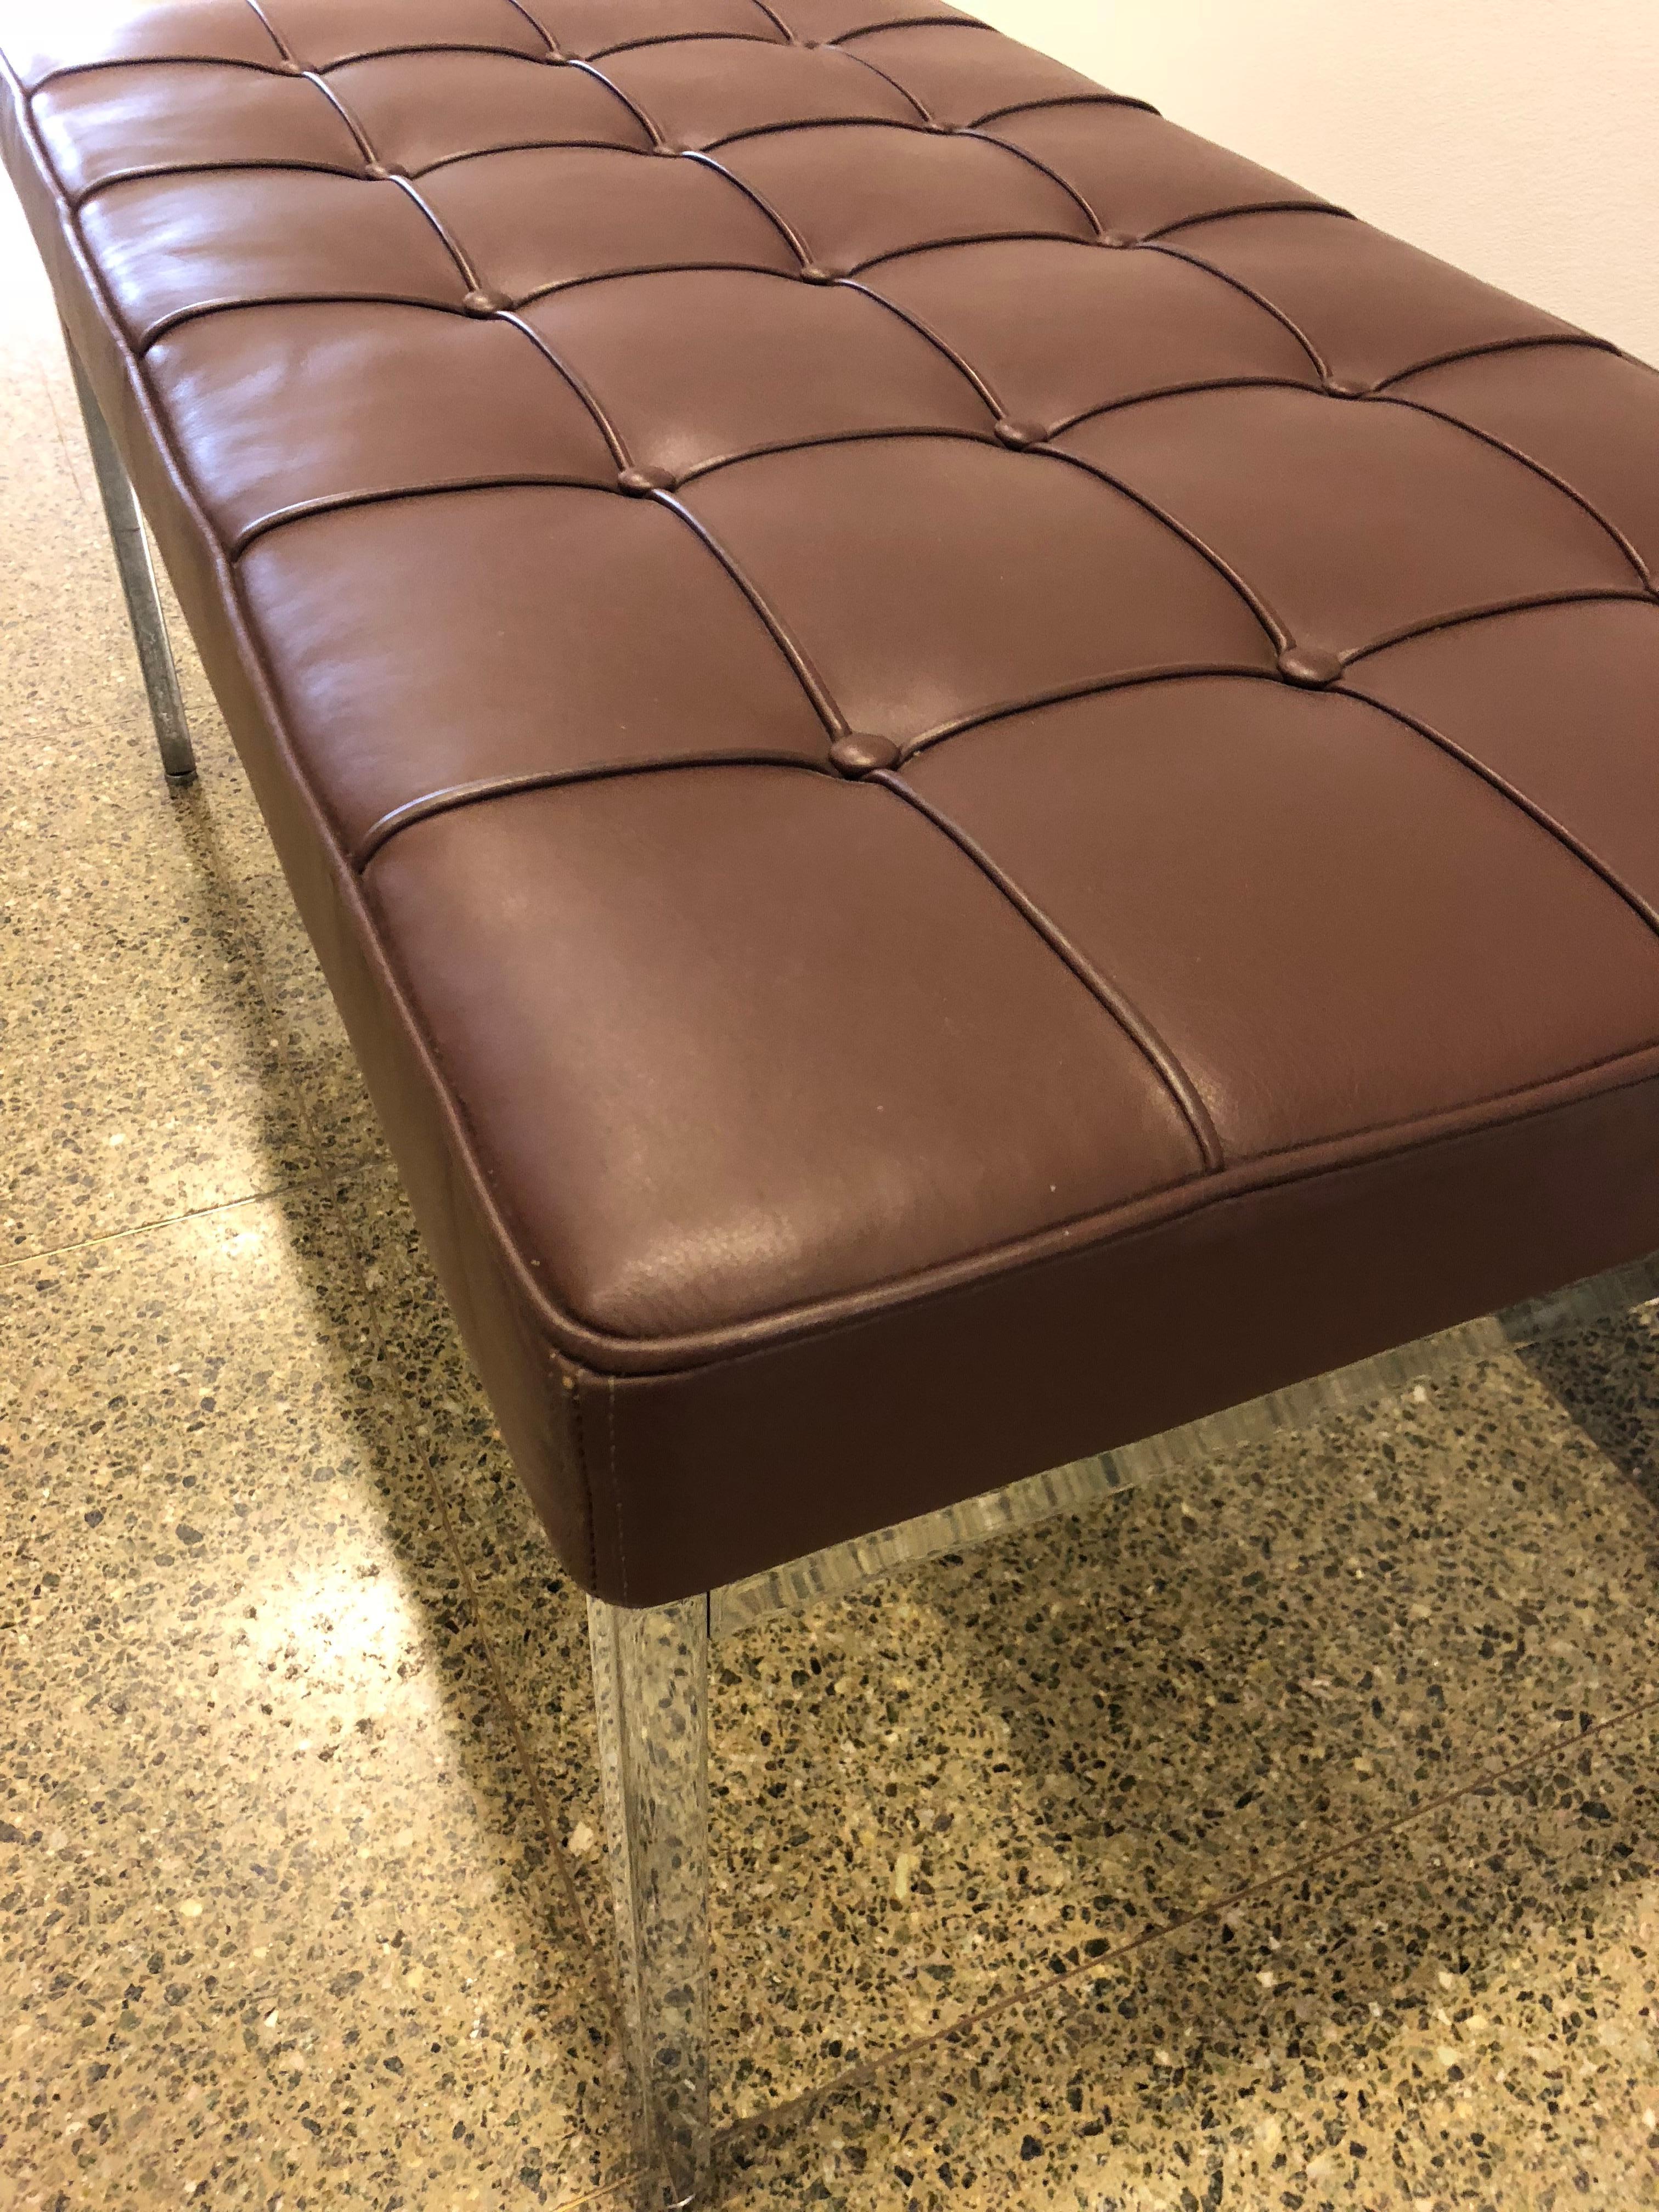 American Florence Knoll Tufted Brown Leather and Chrome Bench, Mfg. Knoll